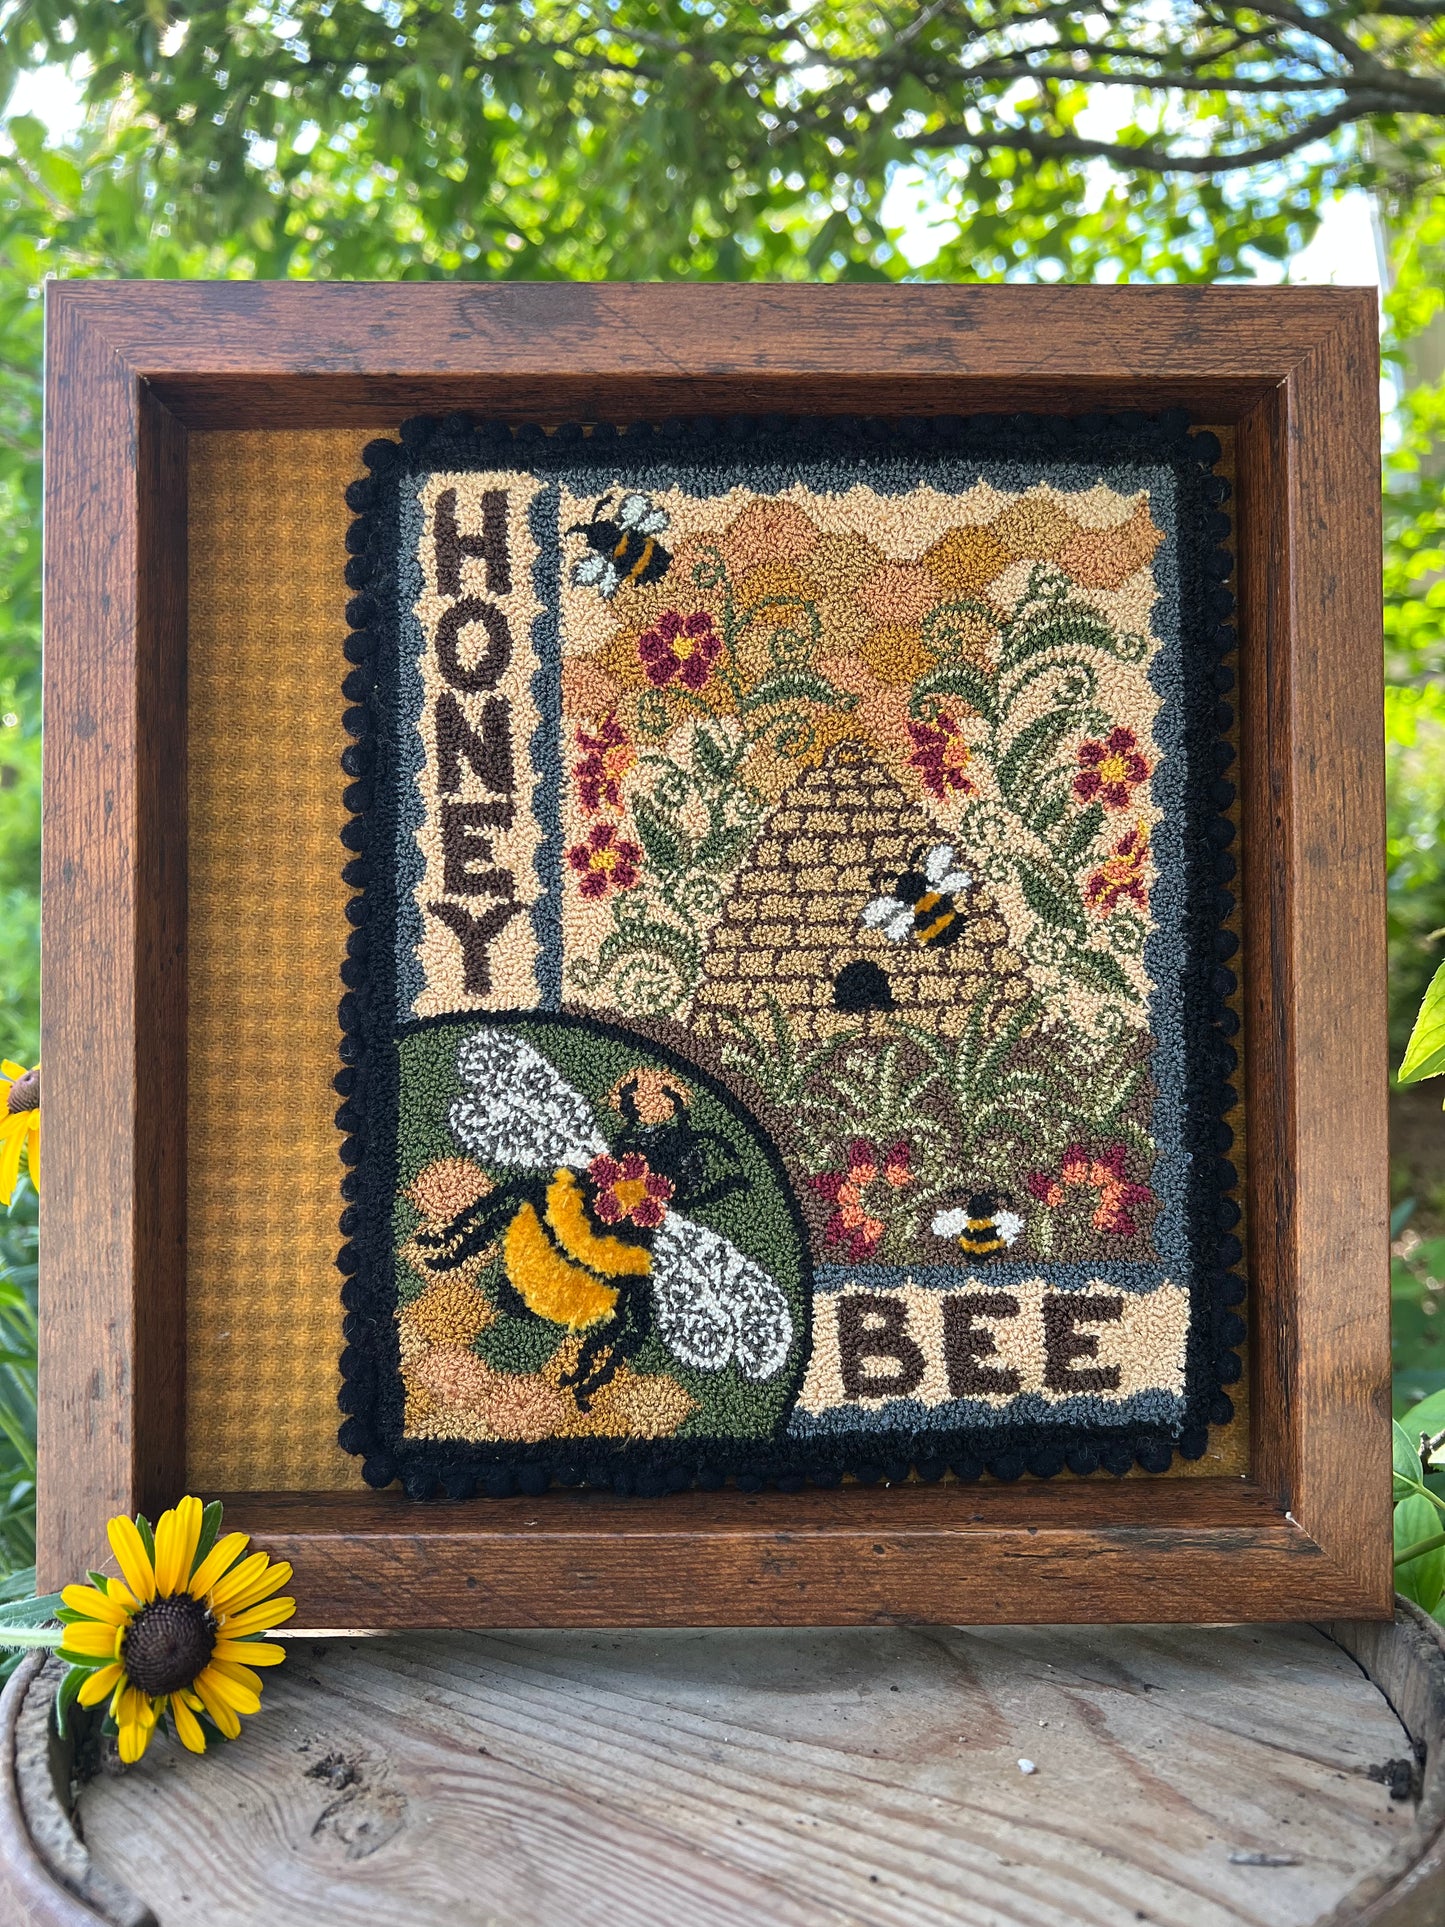 Honey Bee Punch Needle Pattern by Orphaned Wool is a wonderful pattern for all the bee lovers out there. This design can be completed using DMC Floss. The sweet bumblebees and bee skep with the honeycomb and flowers is a delightful pattern to create. Pattern are available as Paper Patterns and Pattern on Weavers Cloth.